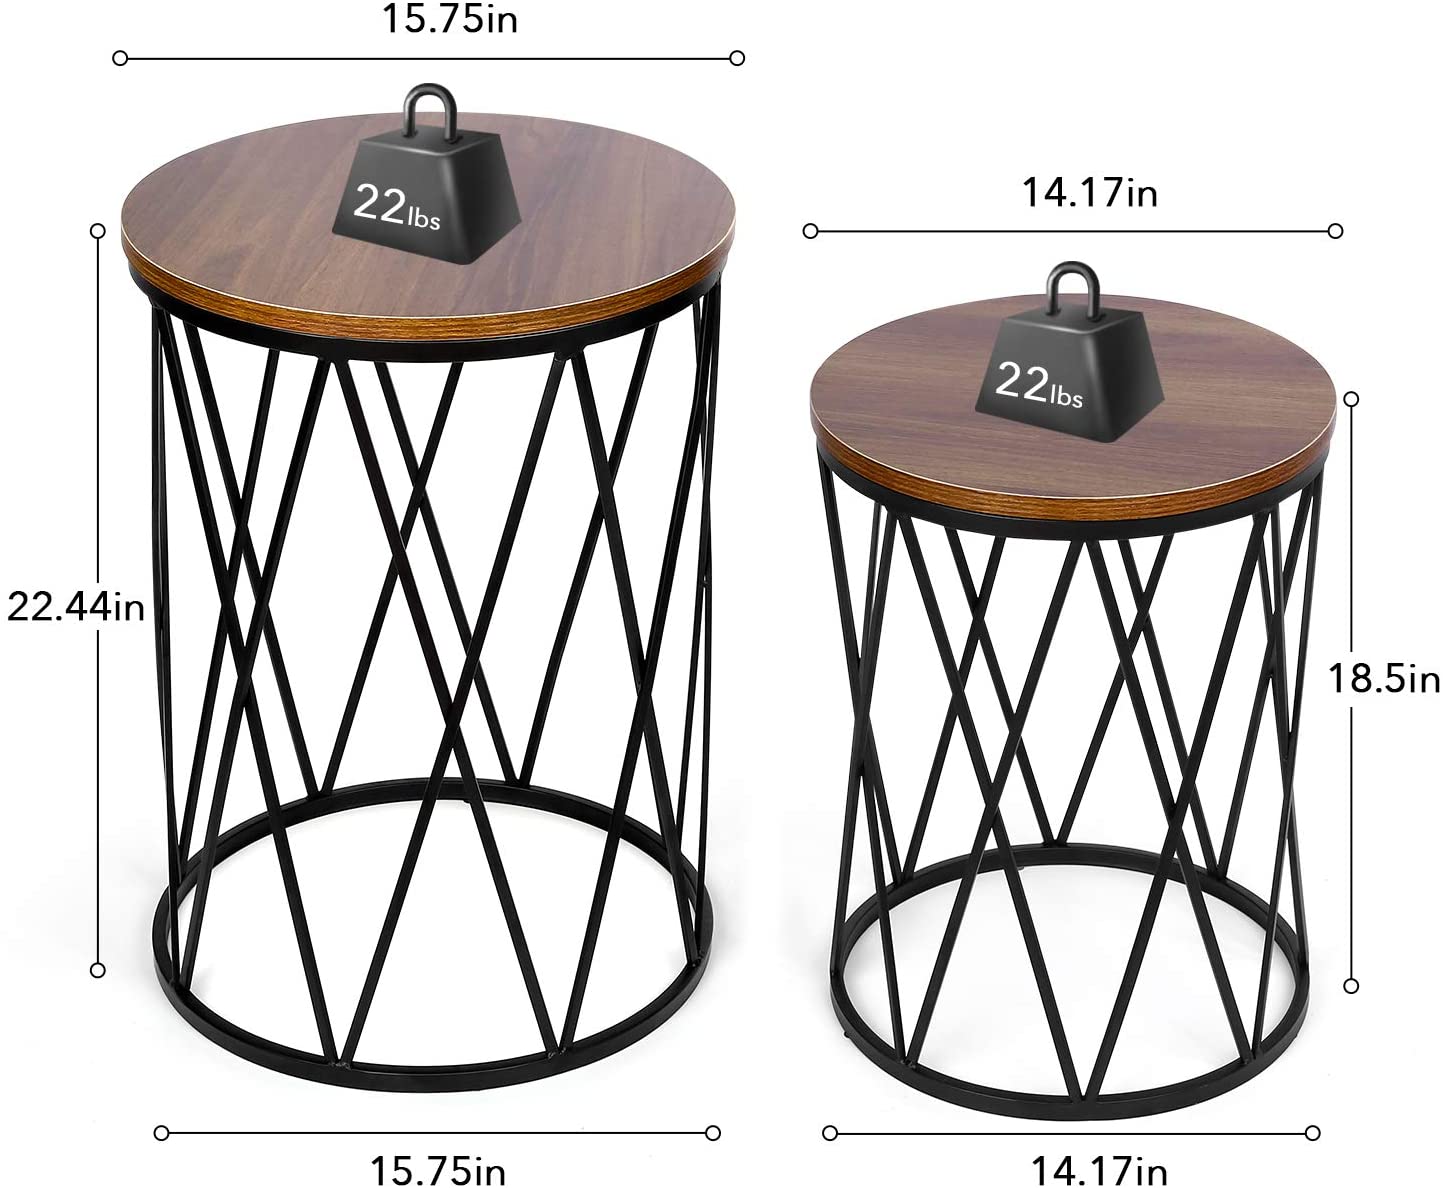 Nest Of Tables: Set of 2 Industrial Nesting Coffee Tables with Wood and Metal Frame, Modern Nightstand for Living Room Bedroom Office, Easy to Storage